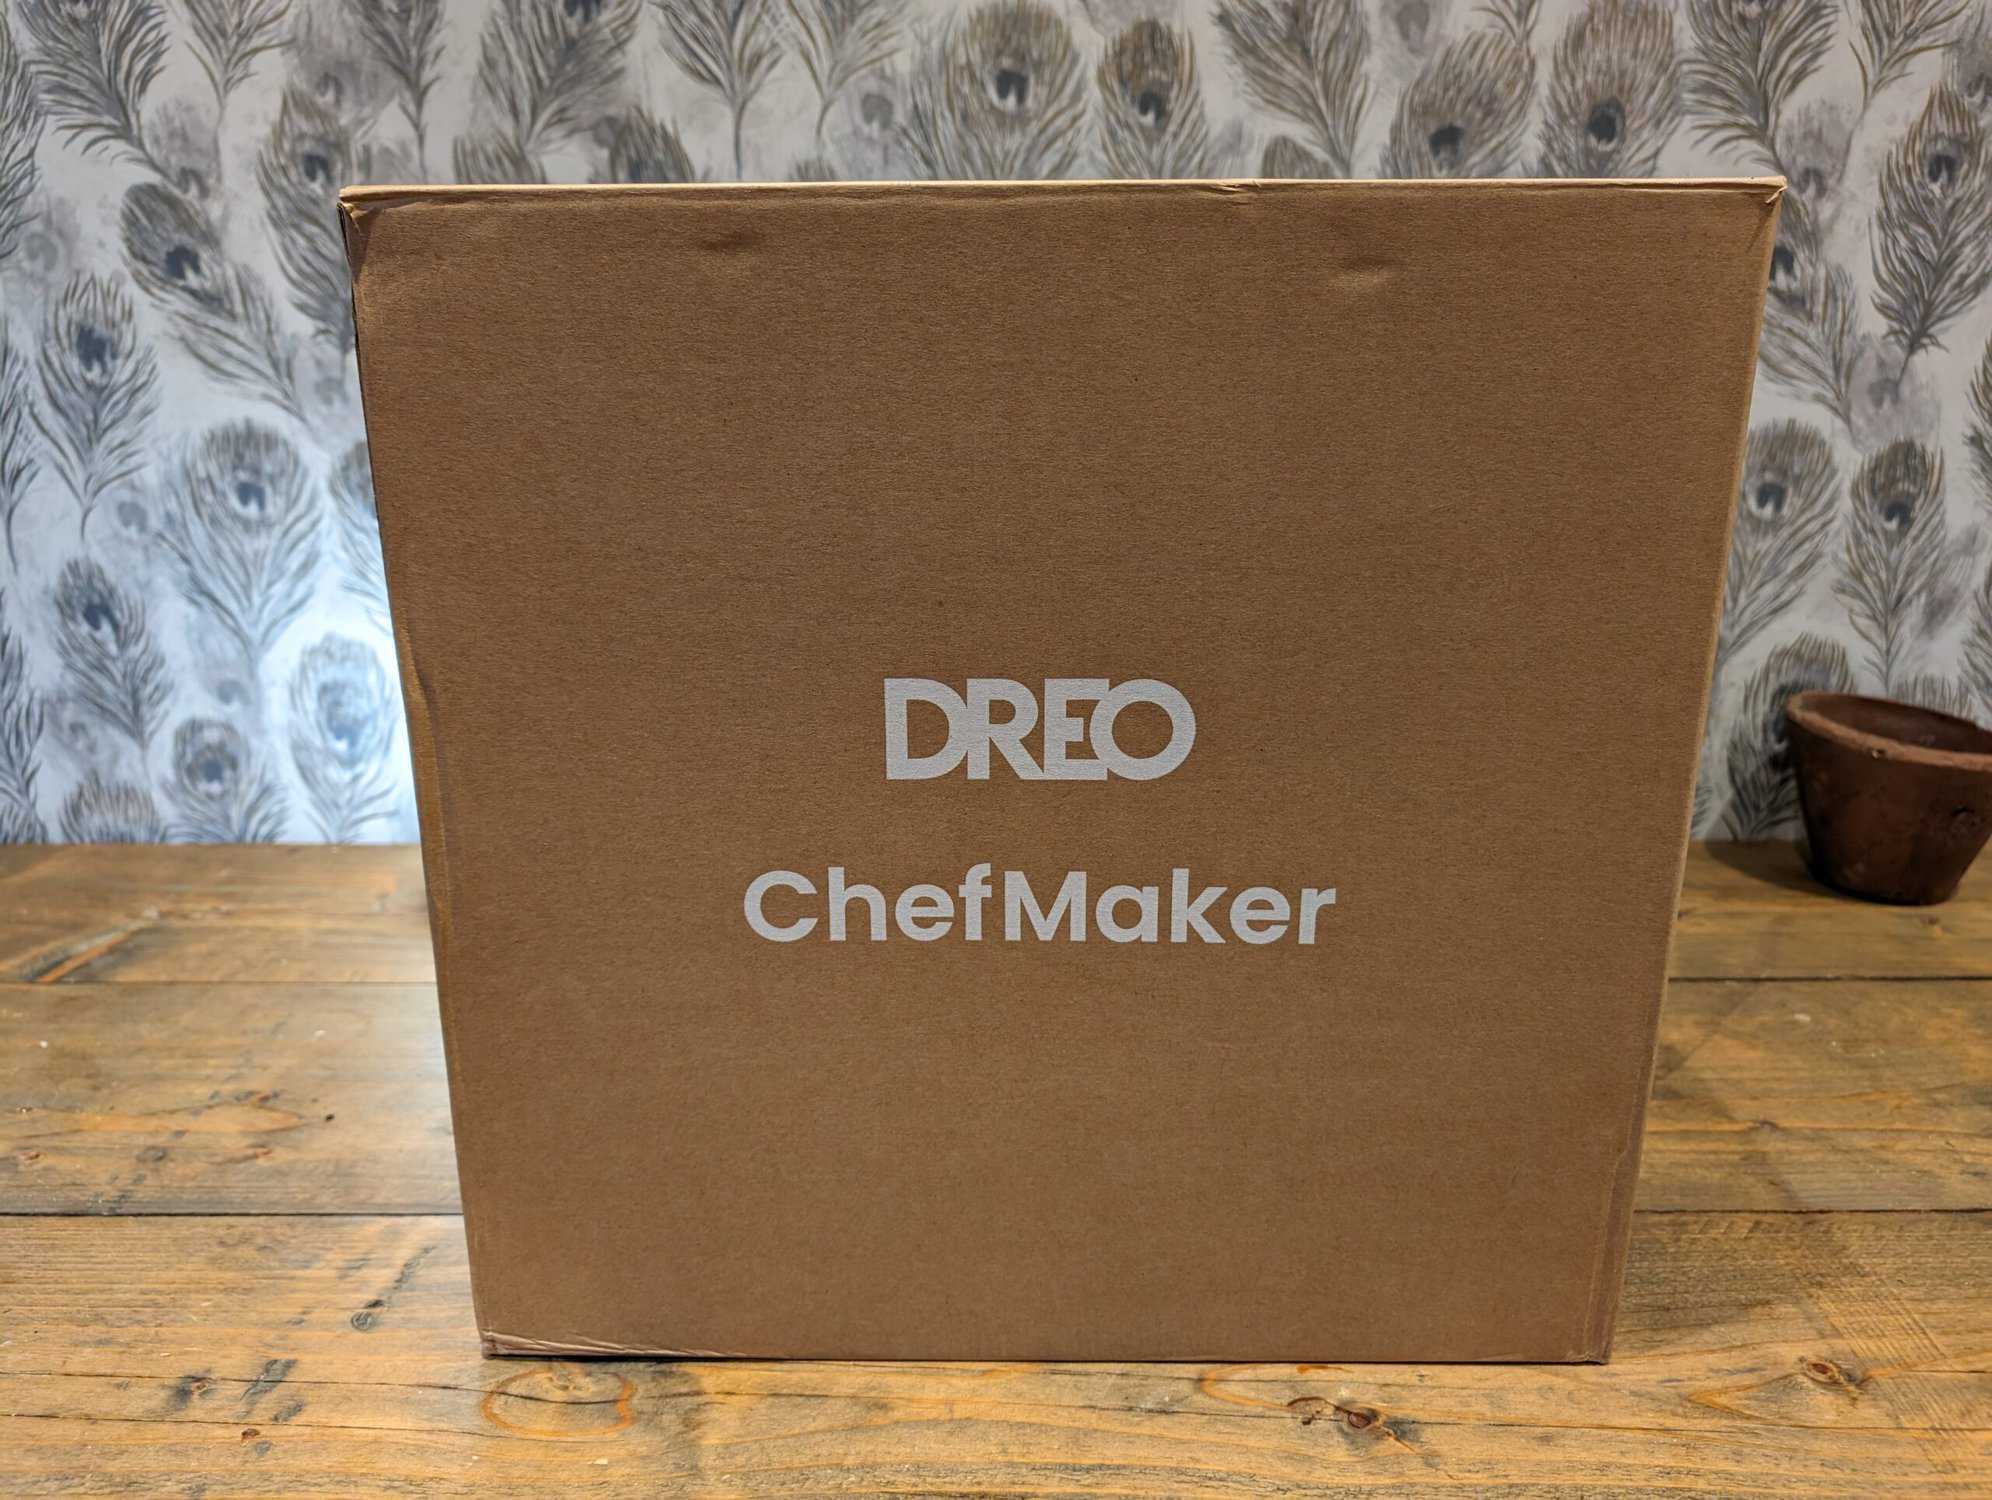 Dreo ChefMaker Combi Fryer Review scaled